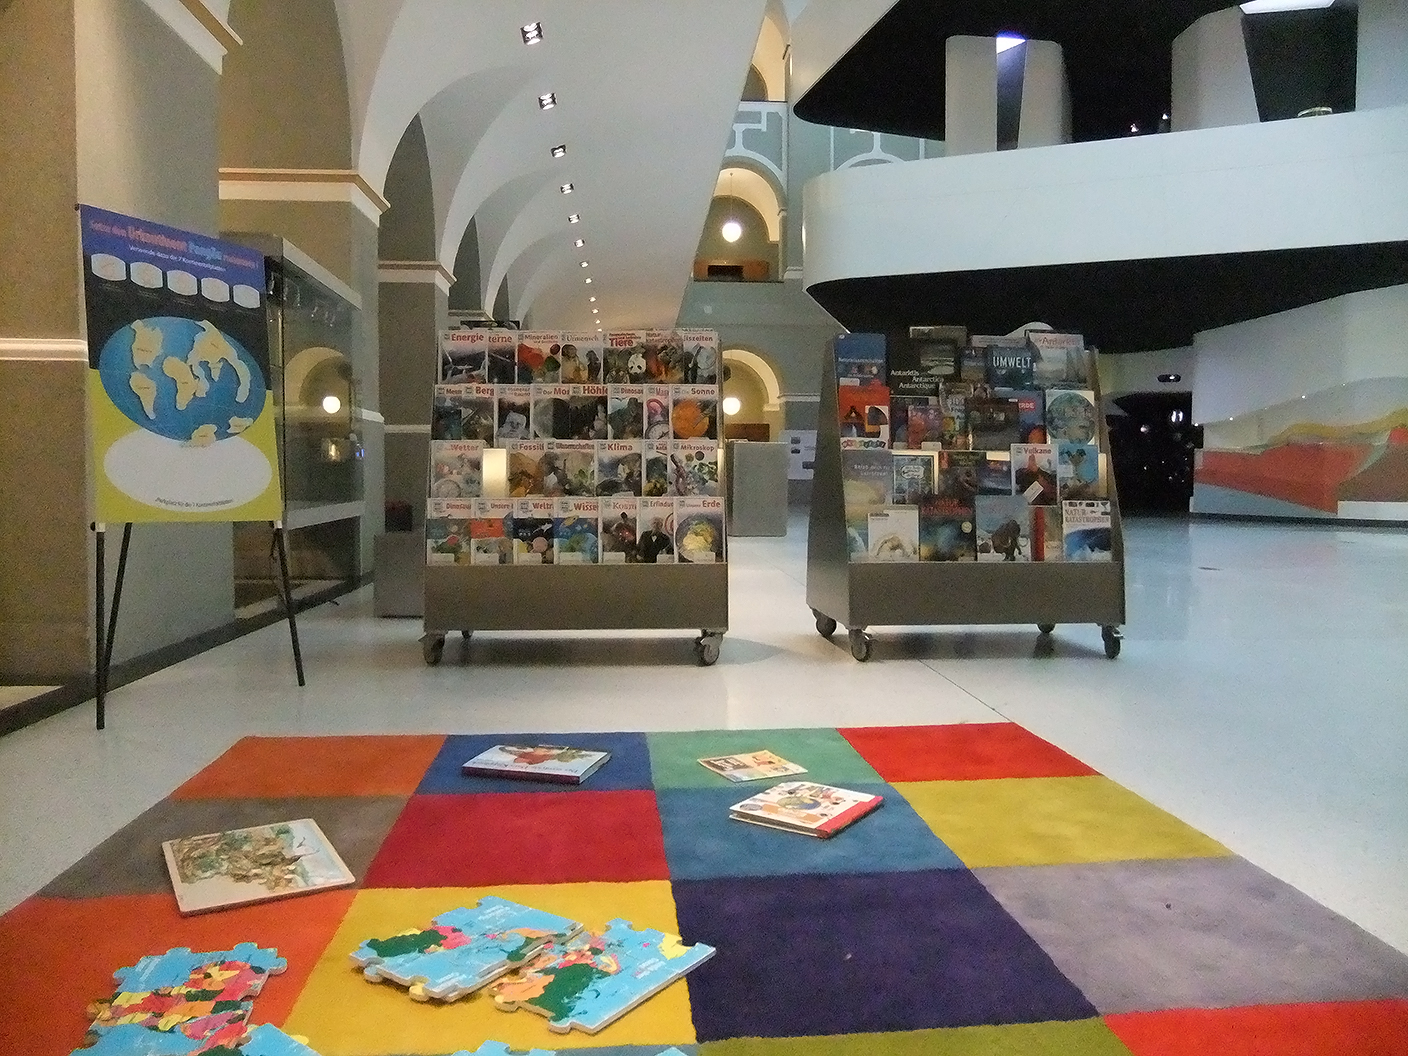 Carpet with books, puzzle in front of the mobile book trolleys